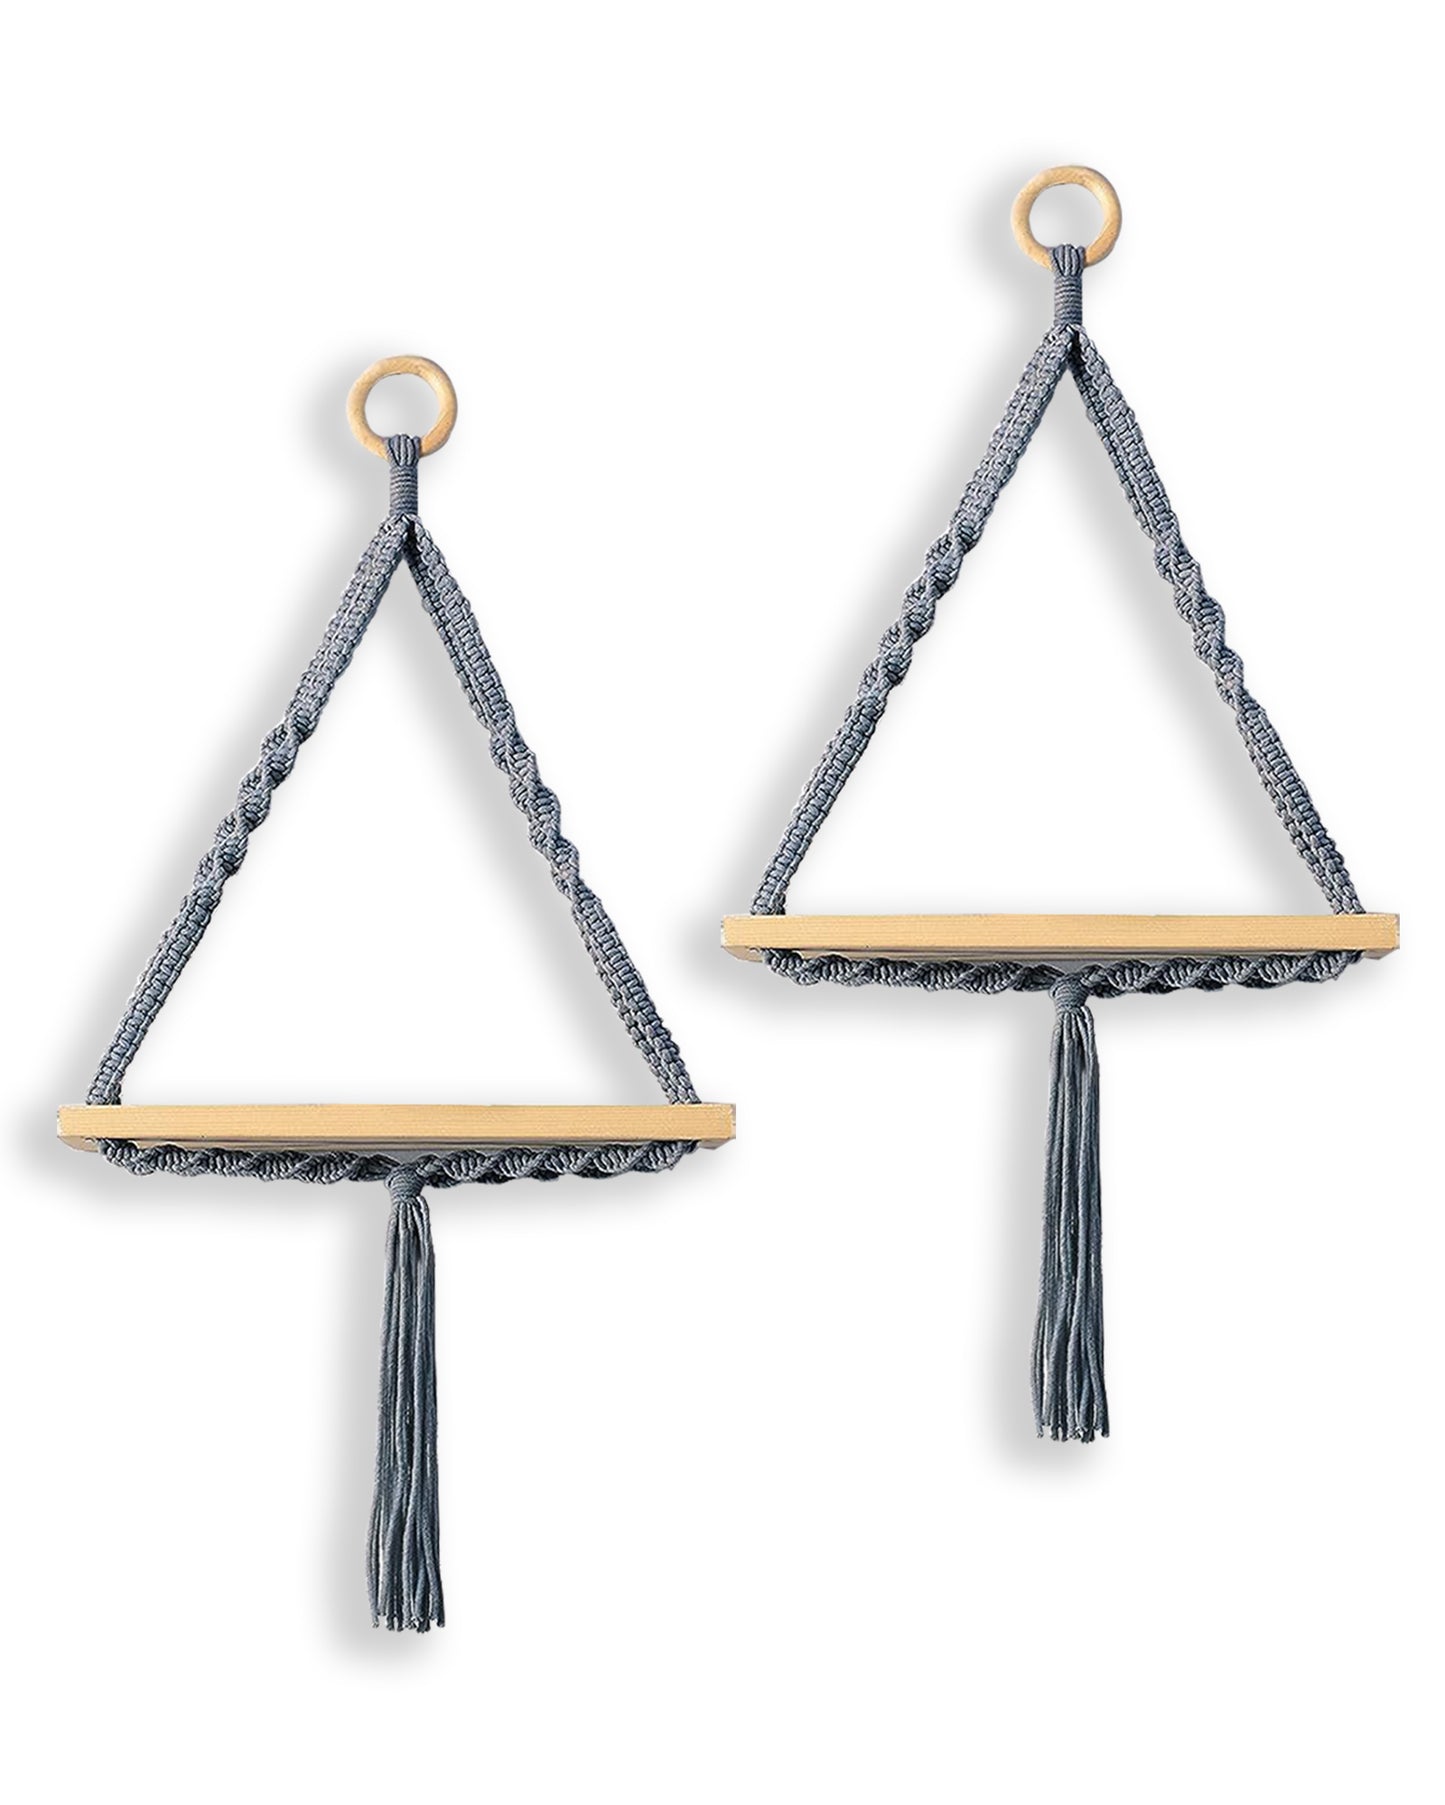 Triangle Rope Hanging Shelves Set of 2, Wood Floating Shelf for Wall Décor Bedroom Bathroom Living Room, Display Shelving for Hanging Plants Photos Grey